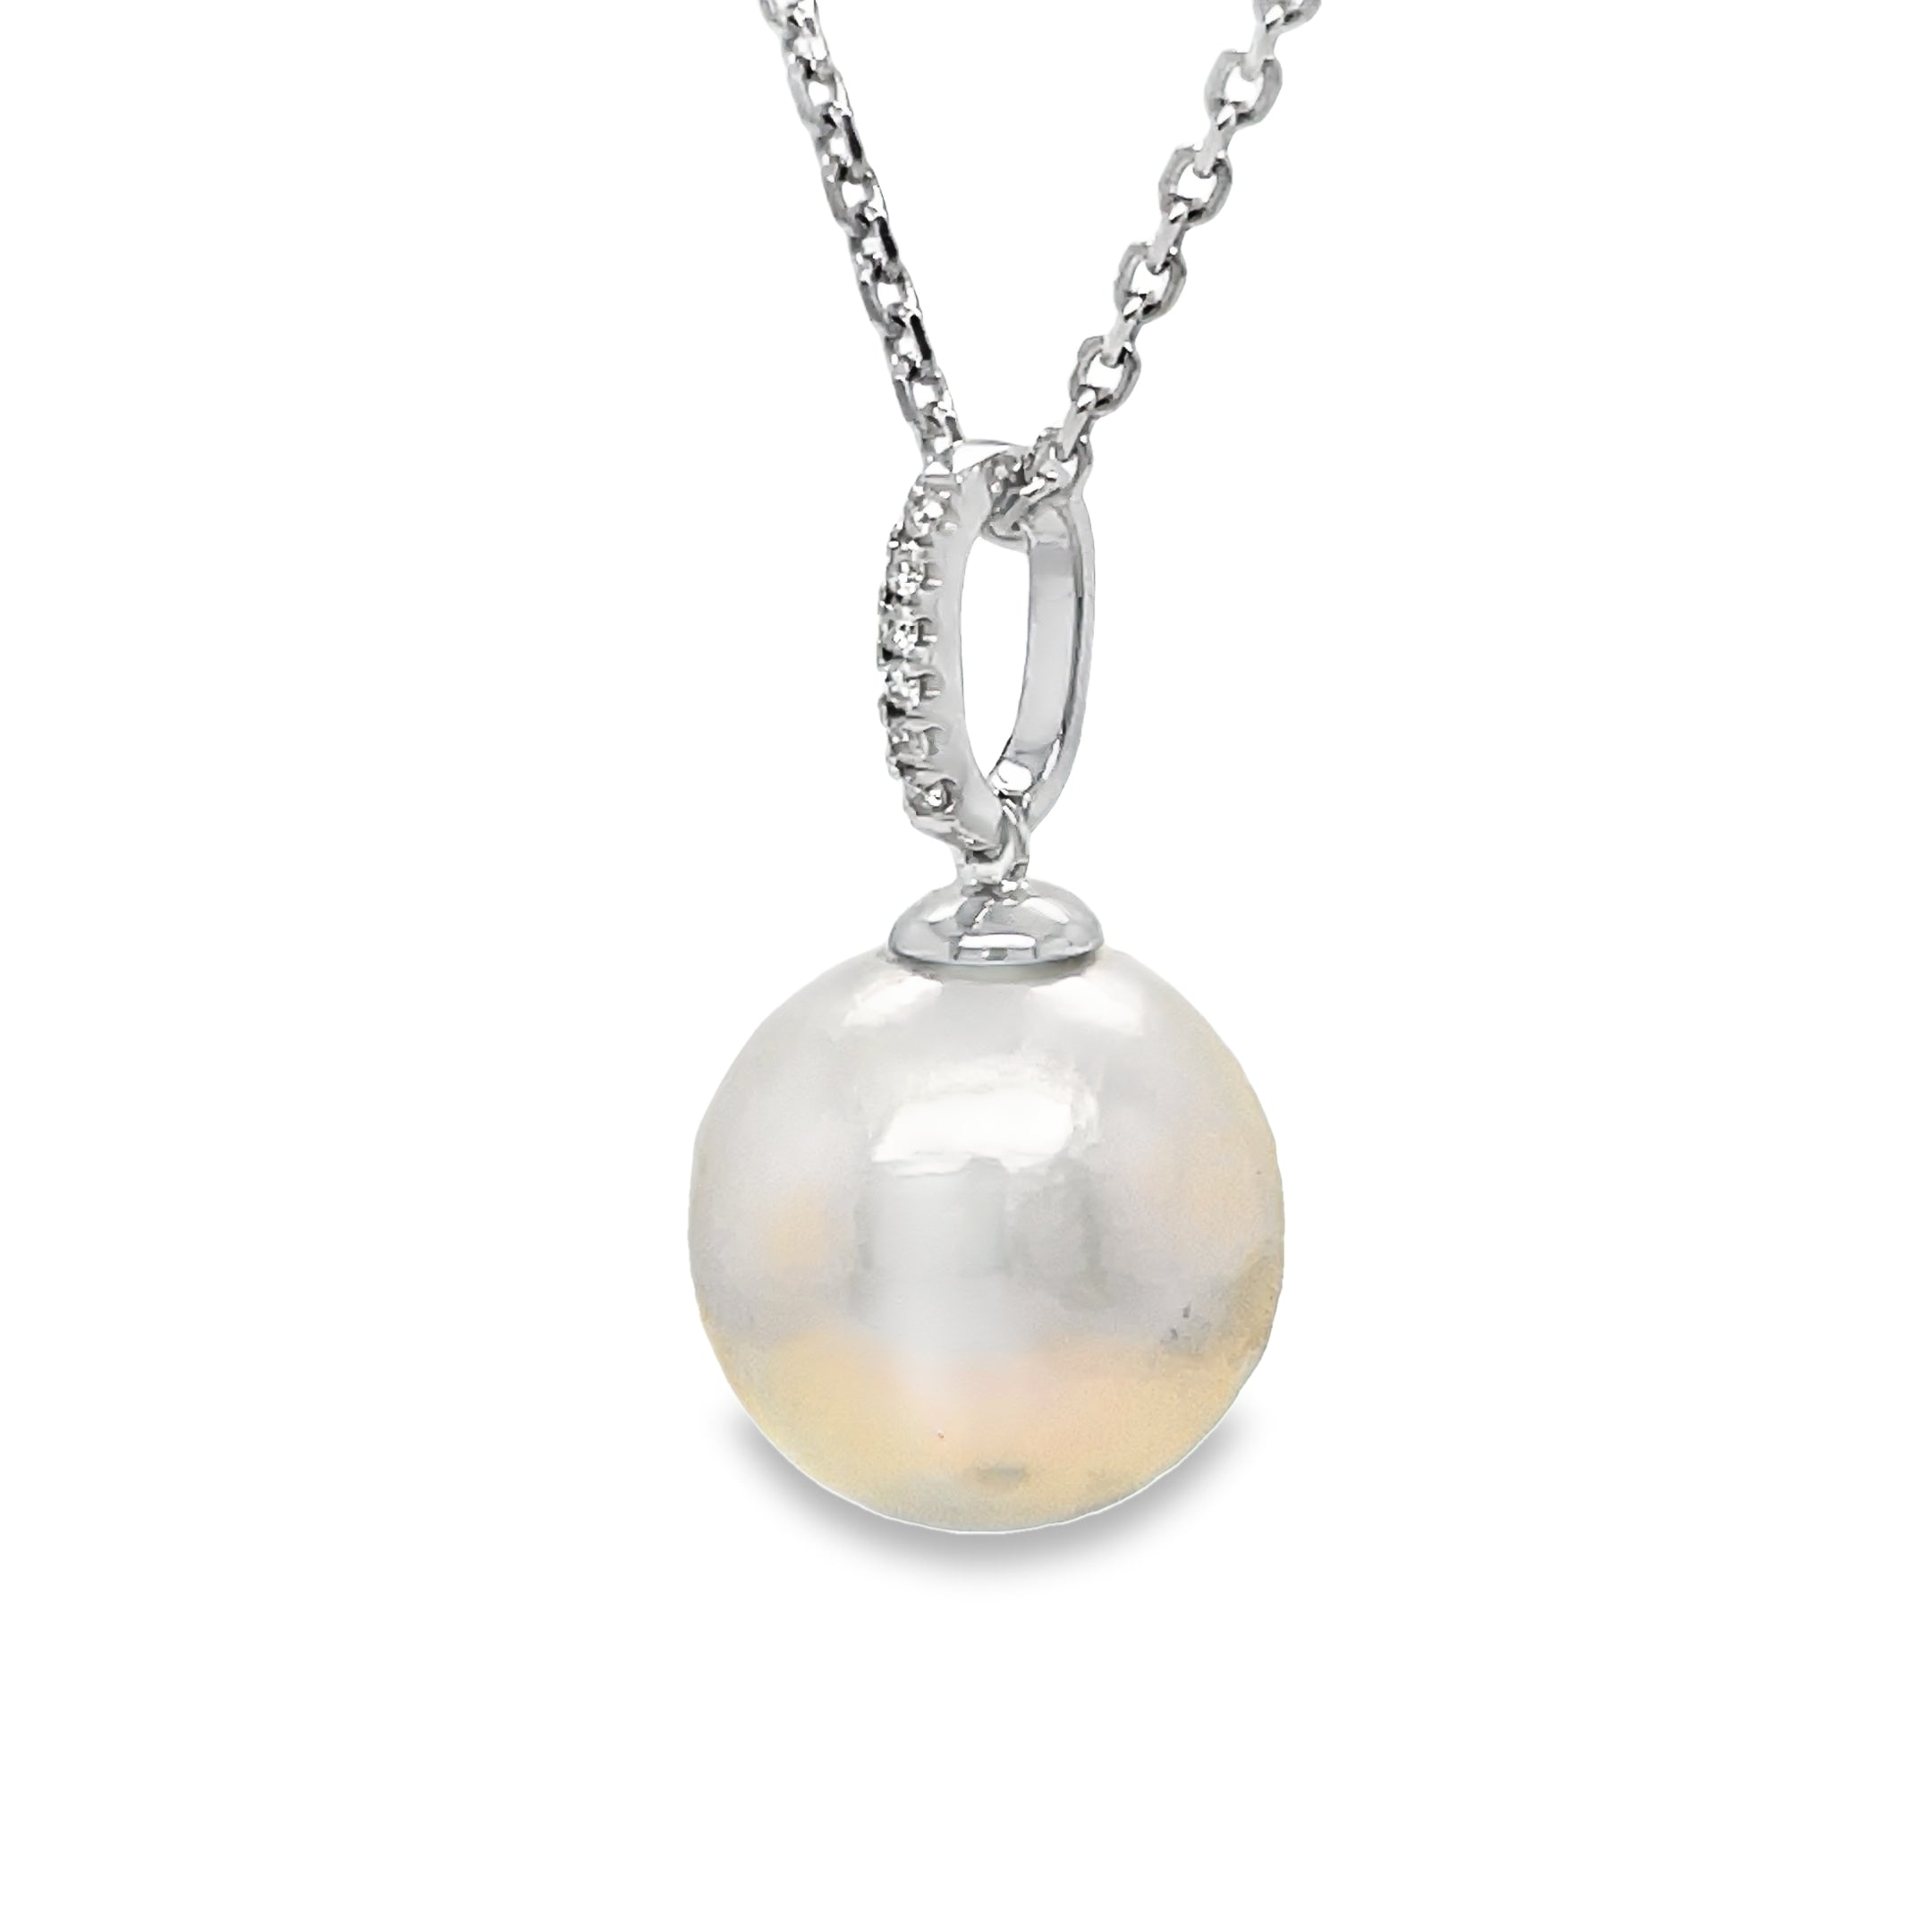 This 14k white gold necklace features a stunning South Sea pearl with great luster and color measuring 12.00 mm. The pearl is accented by a five stone diamond pendant and comes accompanied by an 18" white gold chain. Elevate any look with this elegant and timeless piece.